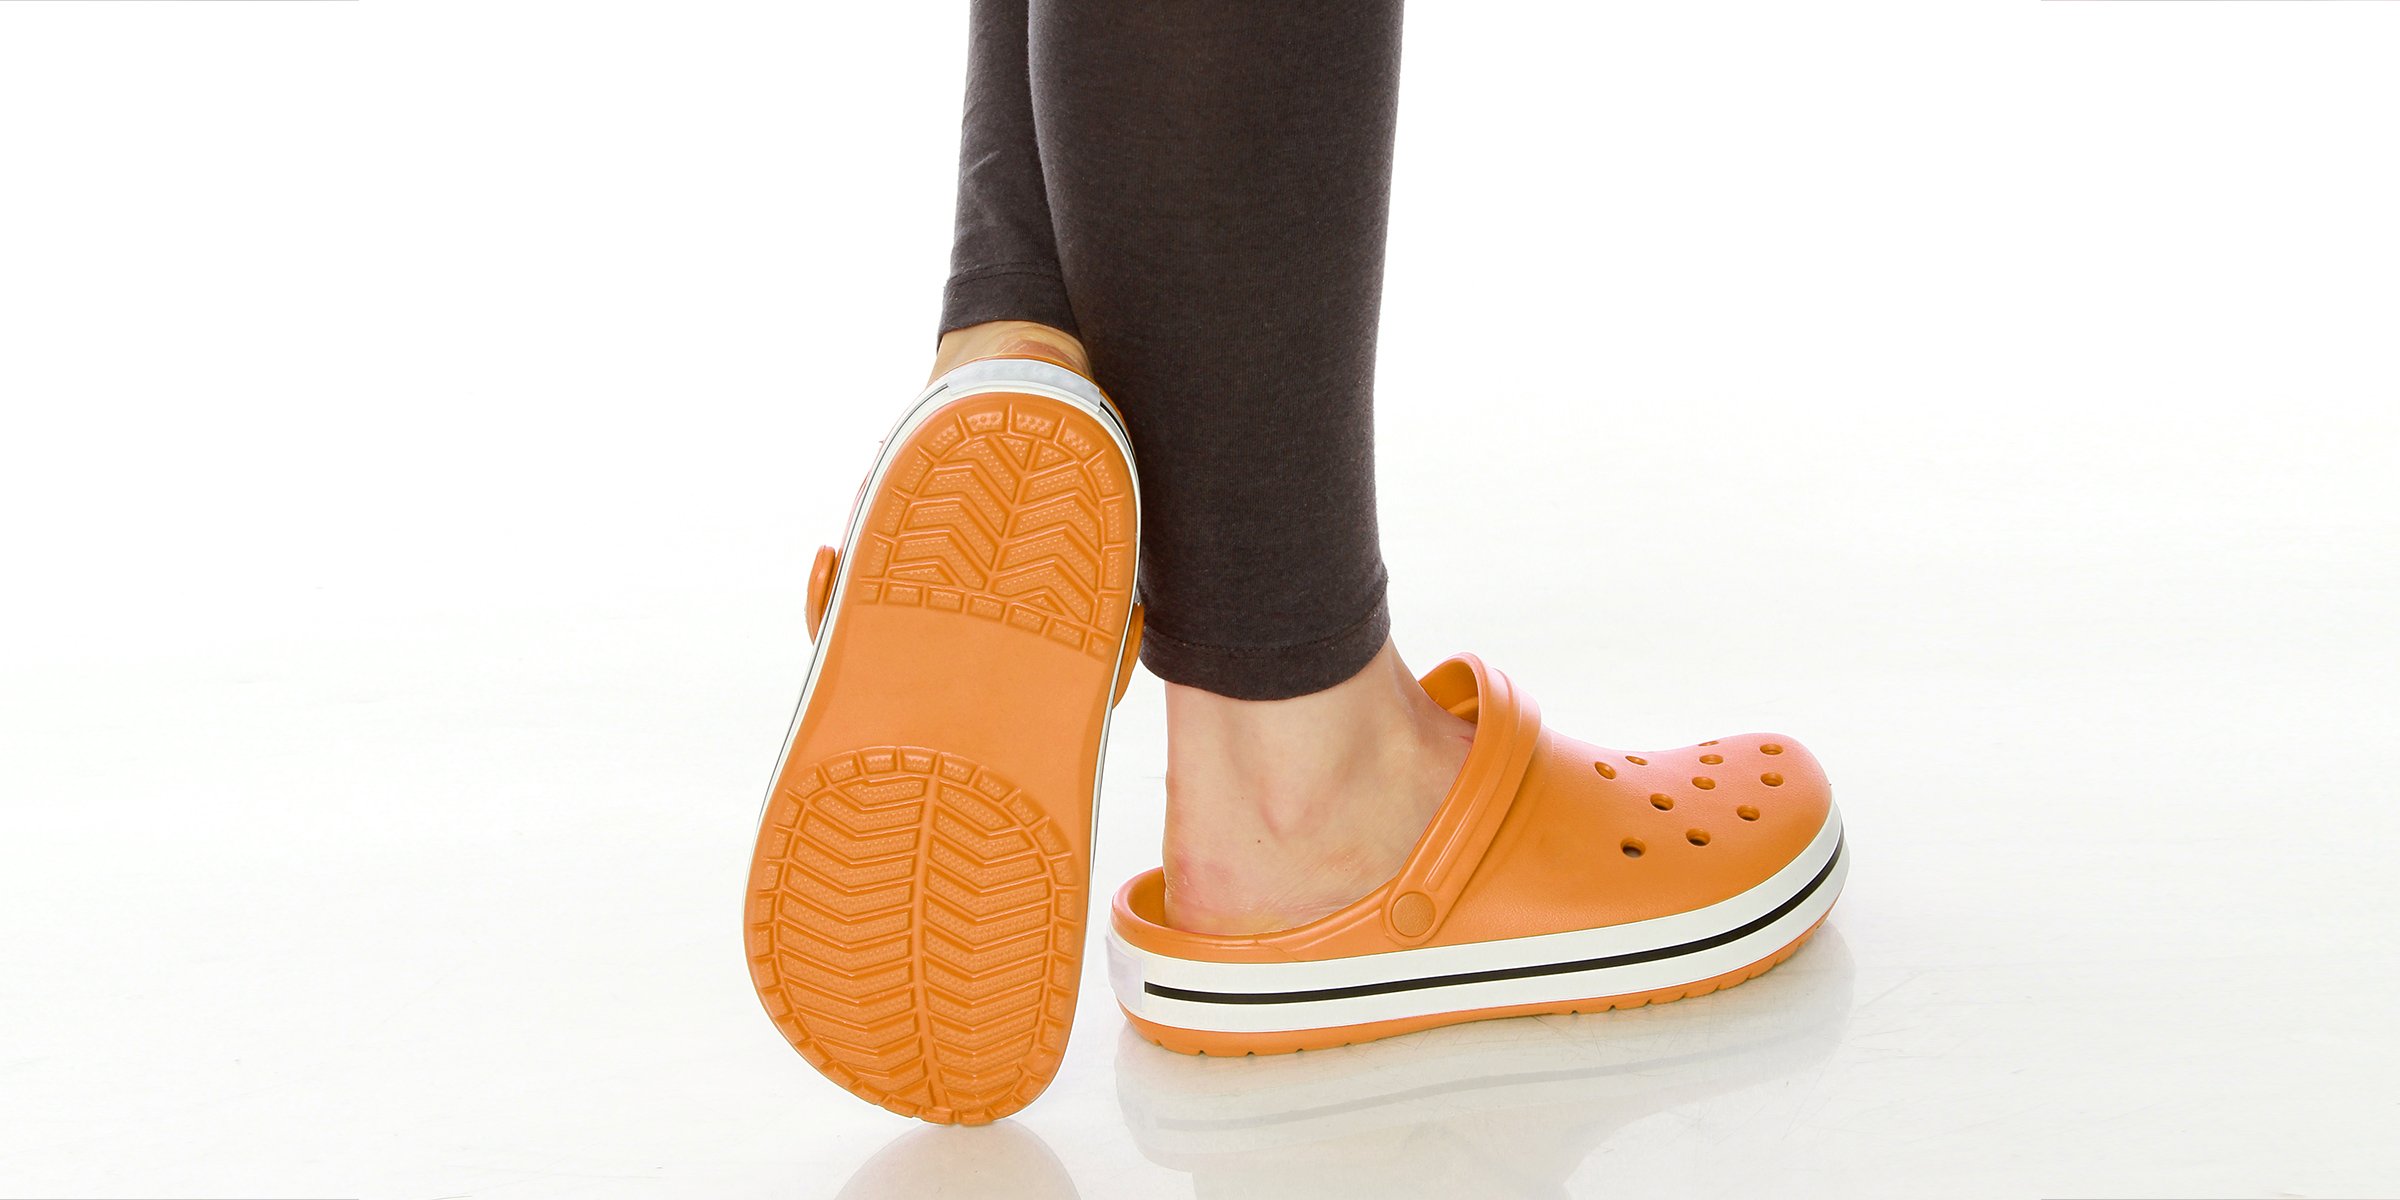 Person wearing a pair of crocs | Source: Shutterstock